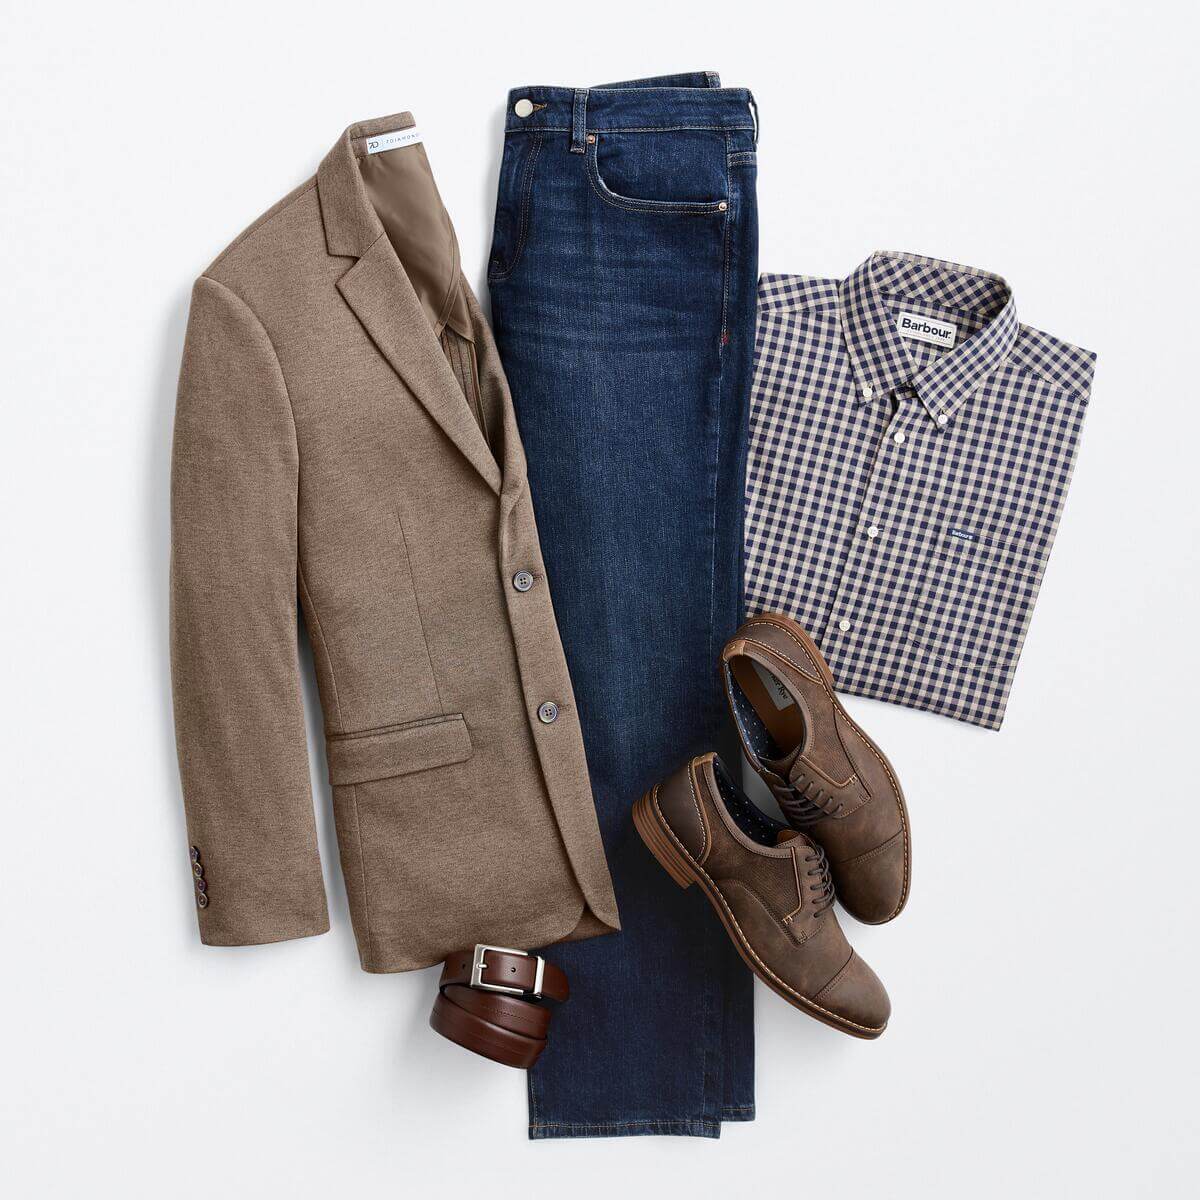 dressy casual wedding outfits for men
